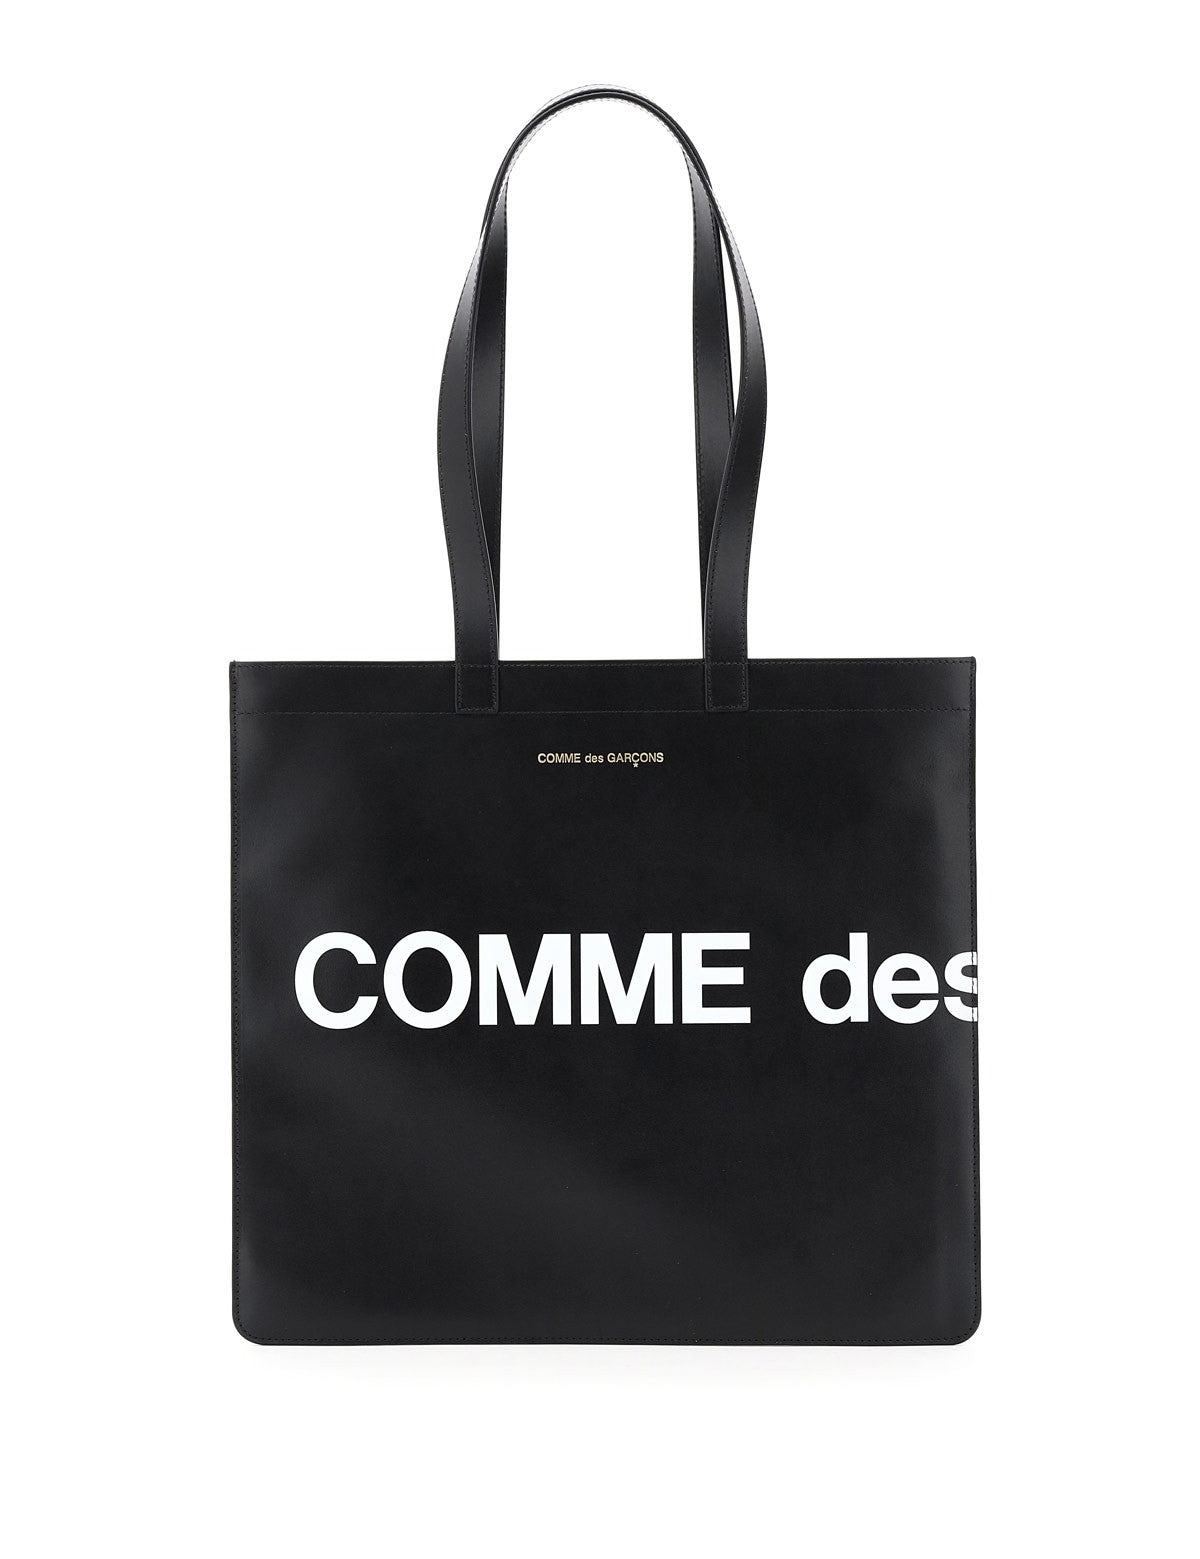 comme-des-garcons-wallet-leather-tote-bag-with-logo_1ceb7ed4-0bf8-4683-ae0a-a0f8cc52980a.jpg